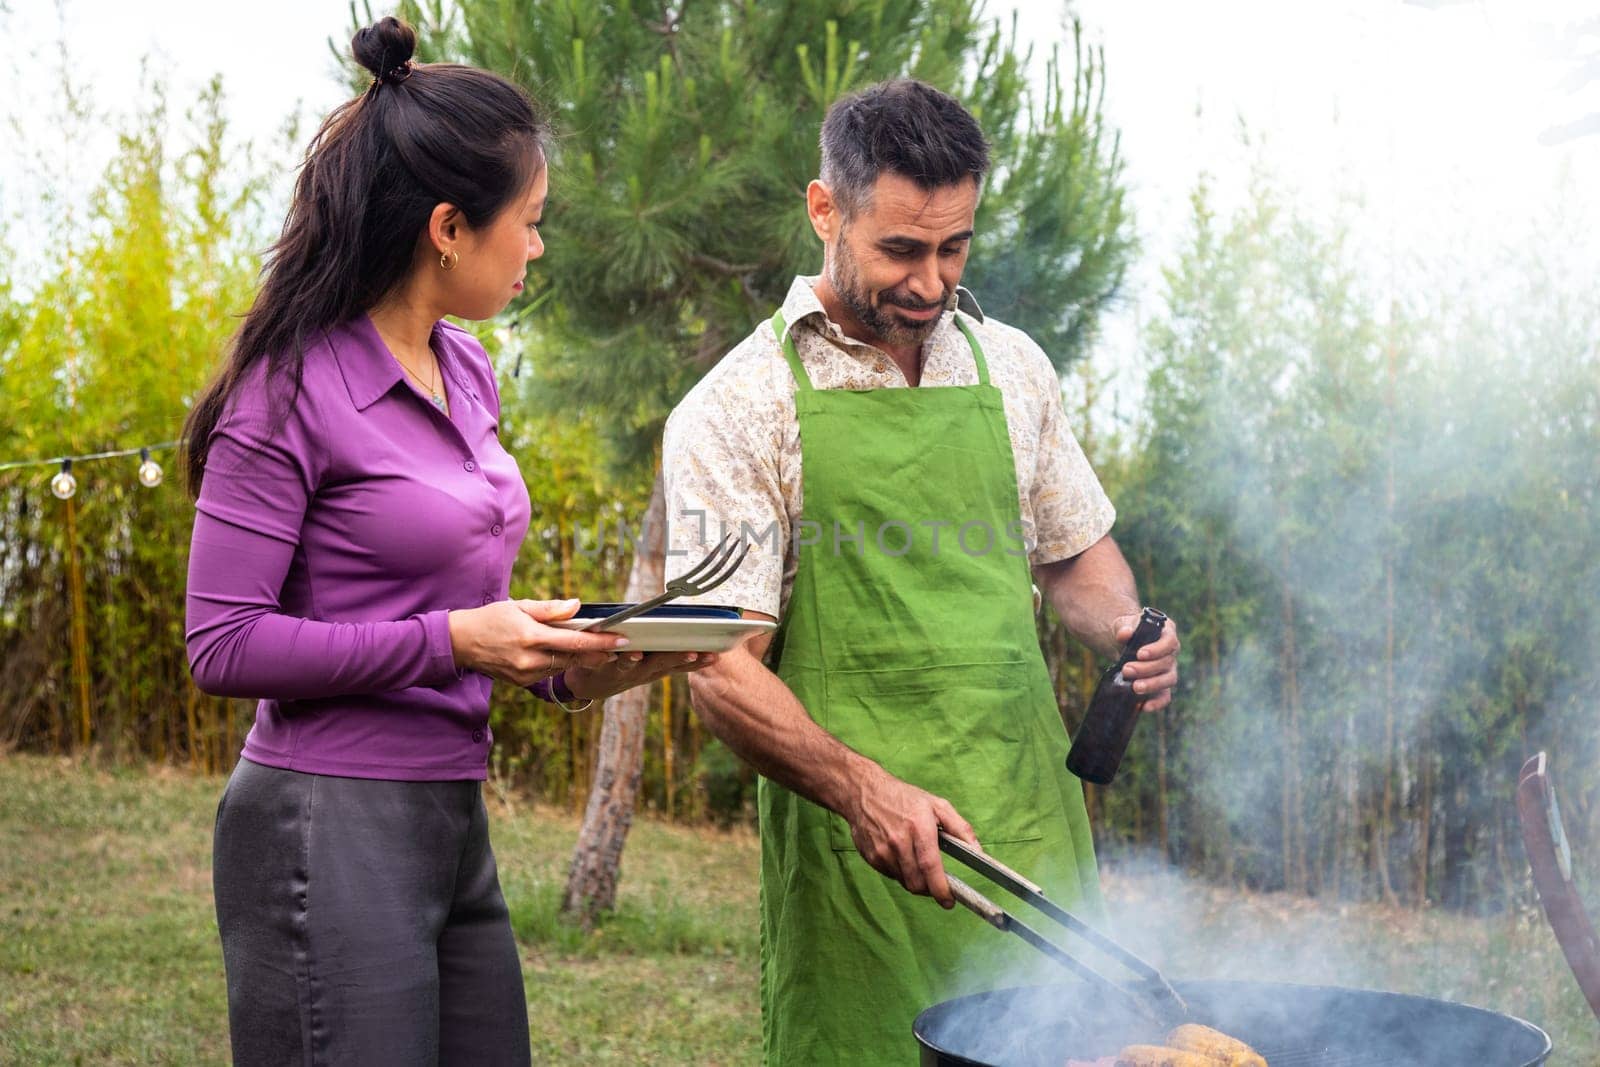 Asian young woman helping caucasian man cook some food on barbecue grill outdoors. Copy space. Garden dinner party concept.